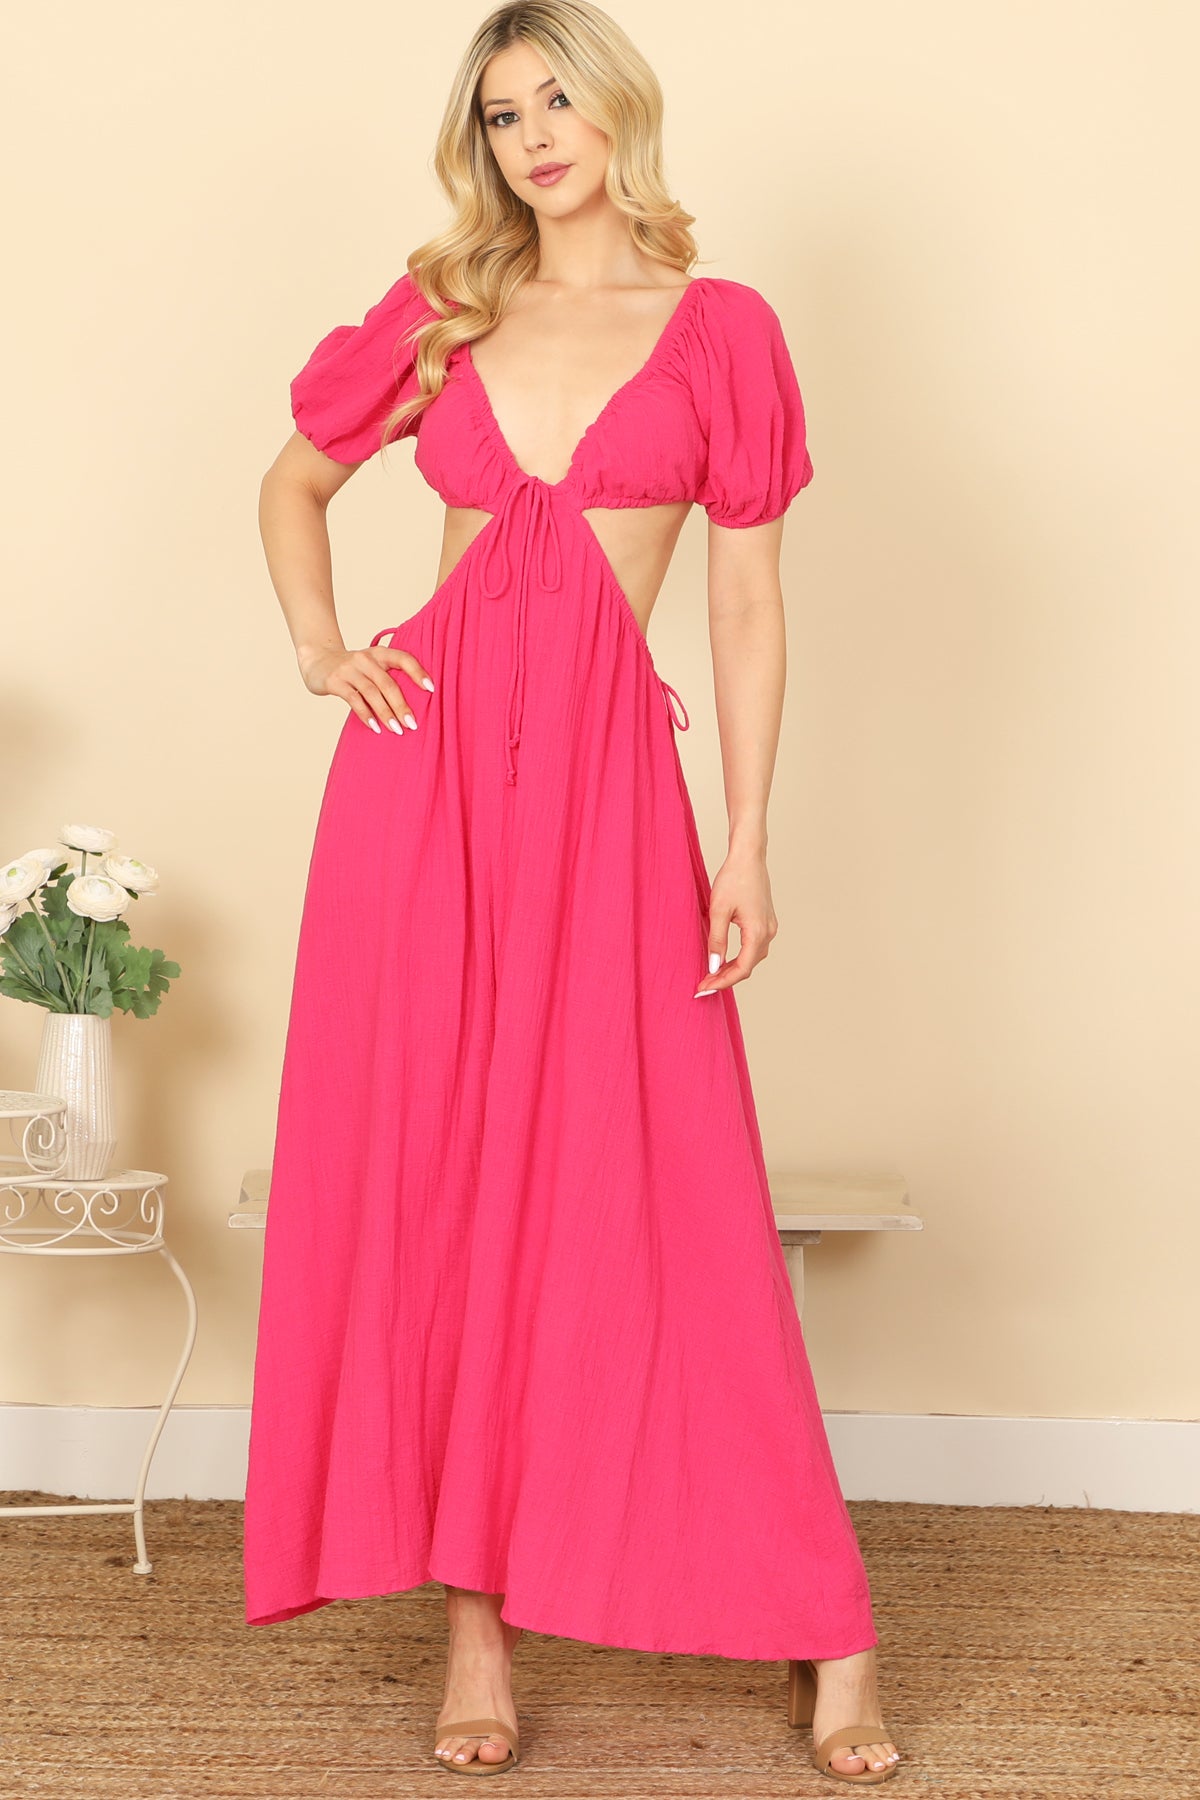 SIDE CUT-OUT DETAIL PUFF SLEEVE SOLID MAXI DRESS 2-2-1